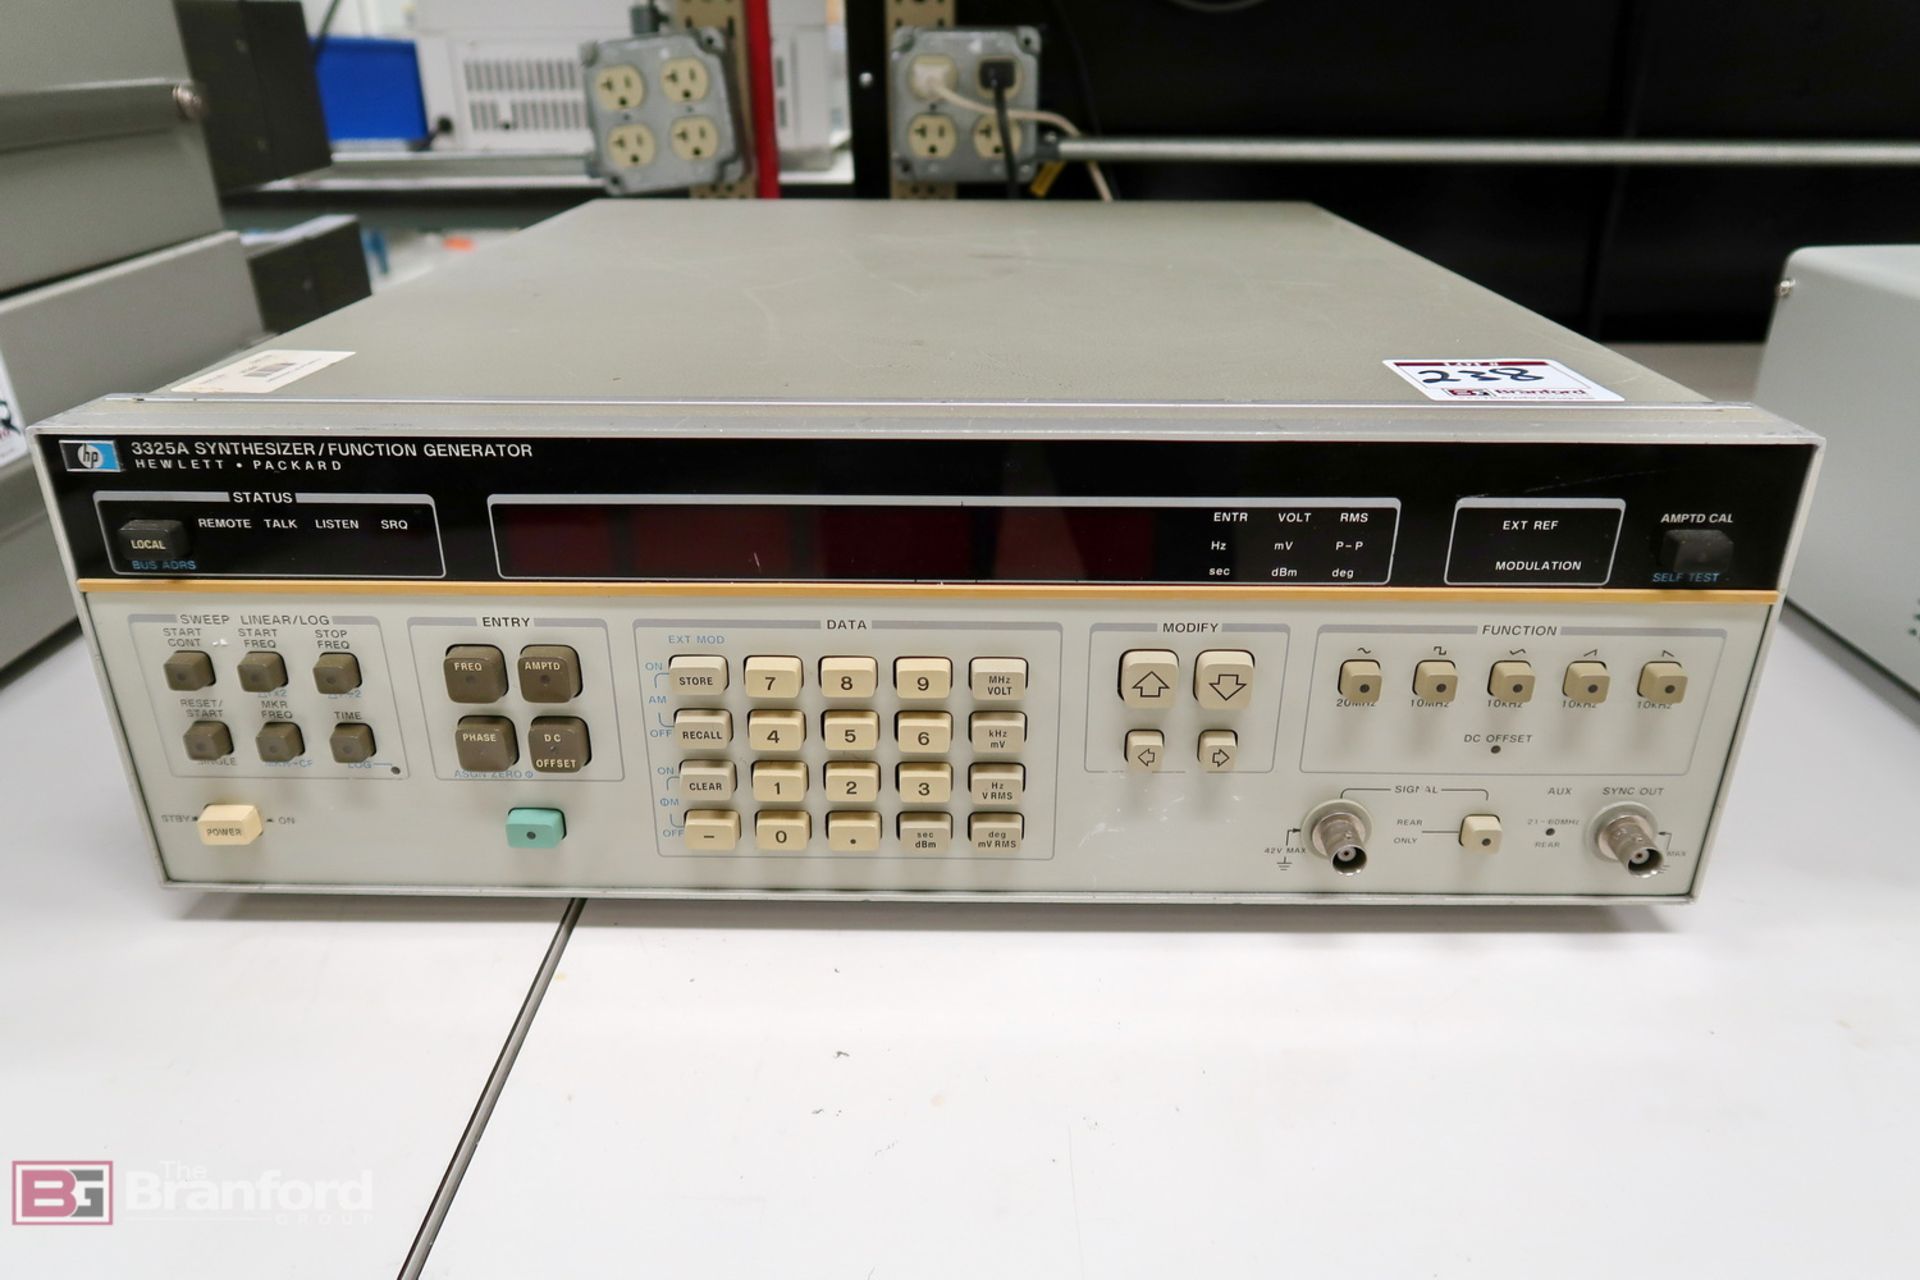 HP 3325A synthesizer / function generator